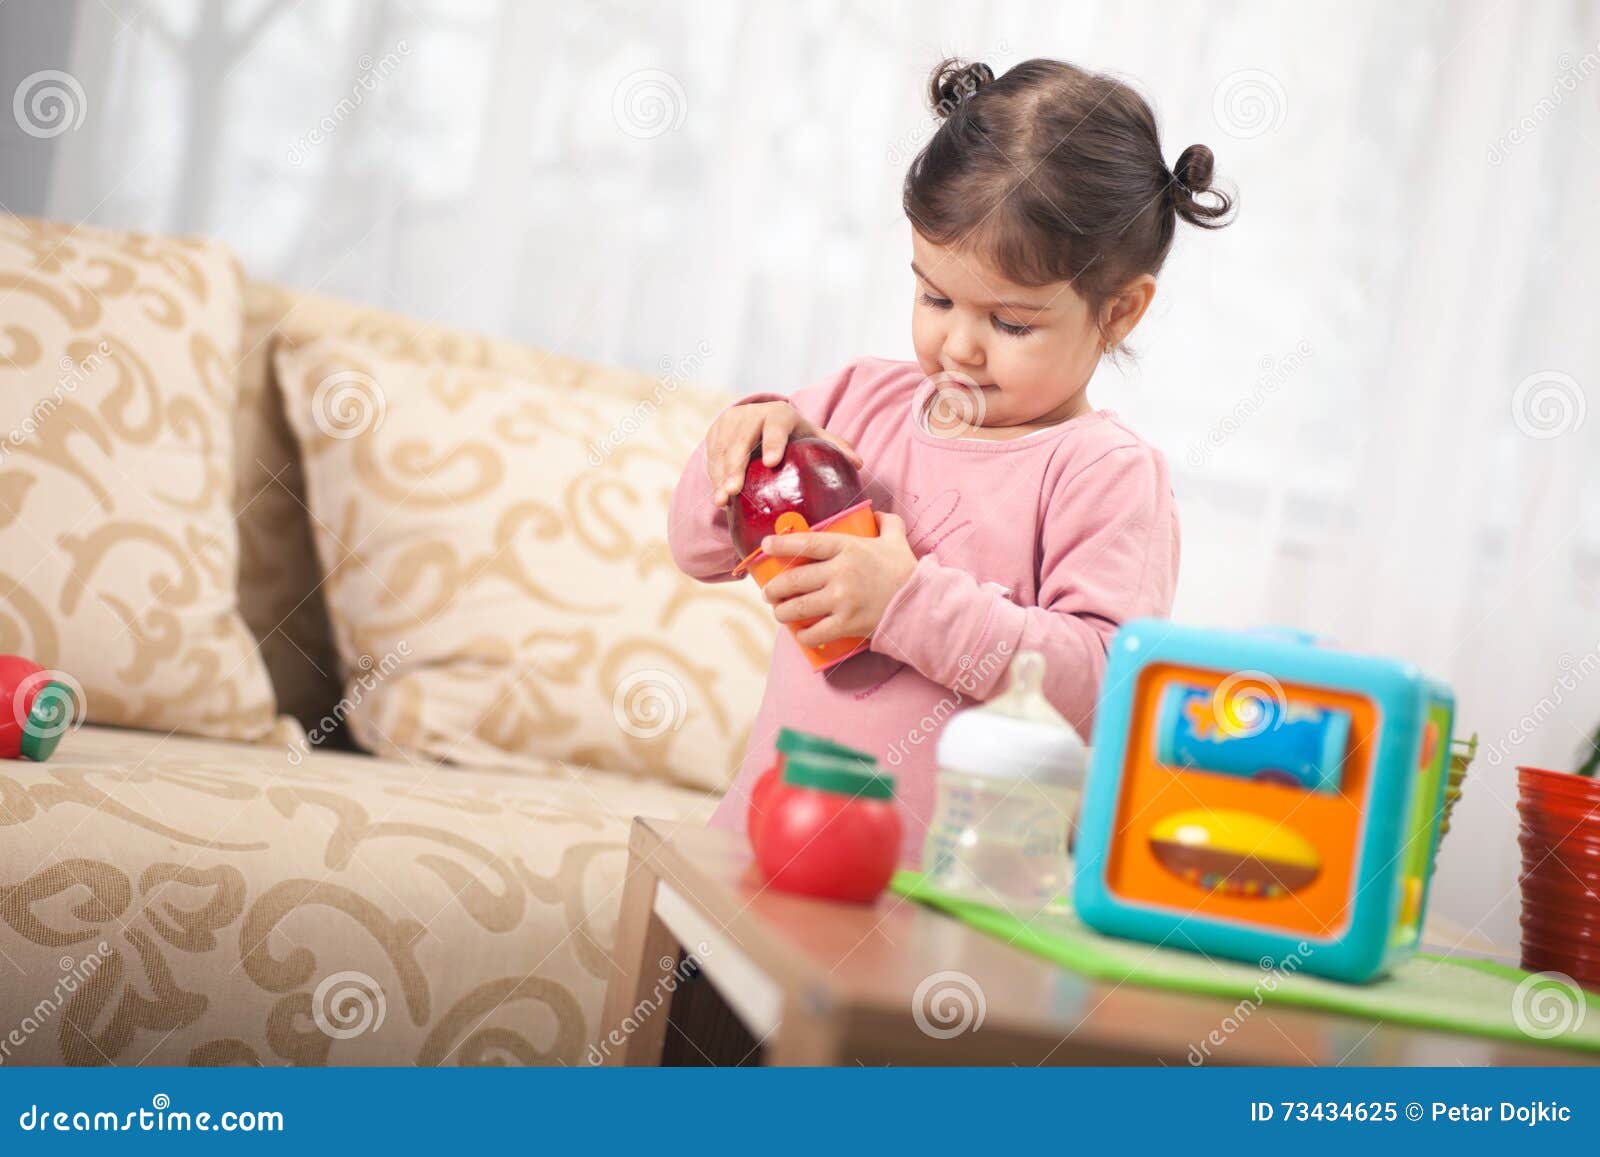 Cute Little Toddler Girl Playing With Toy In Room Child And Toy Stock